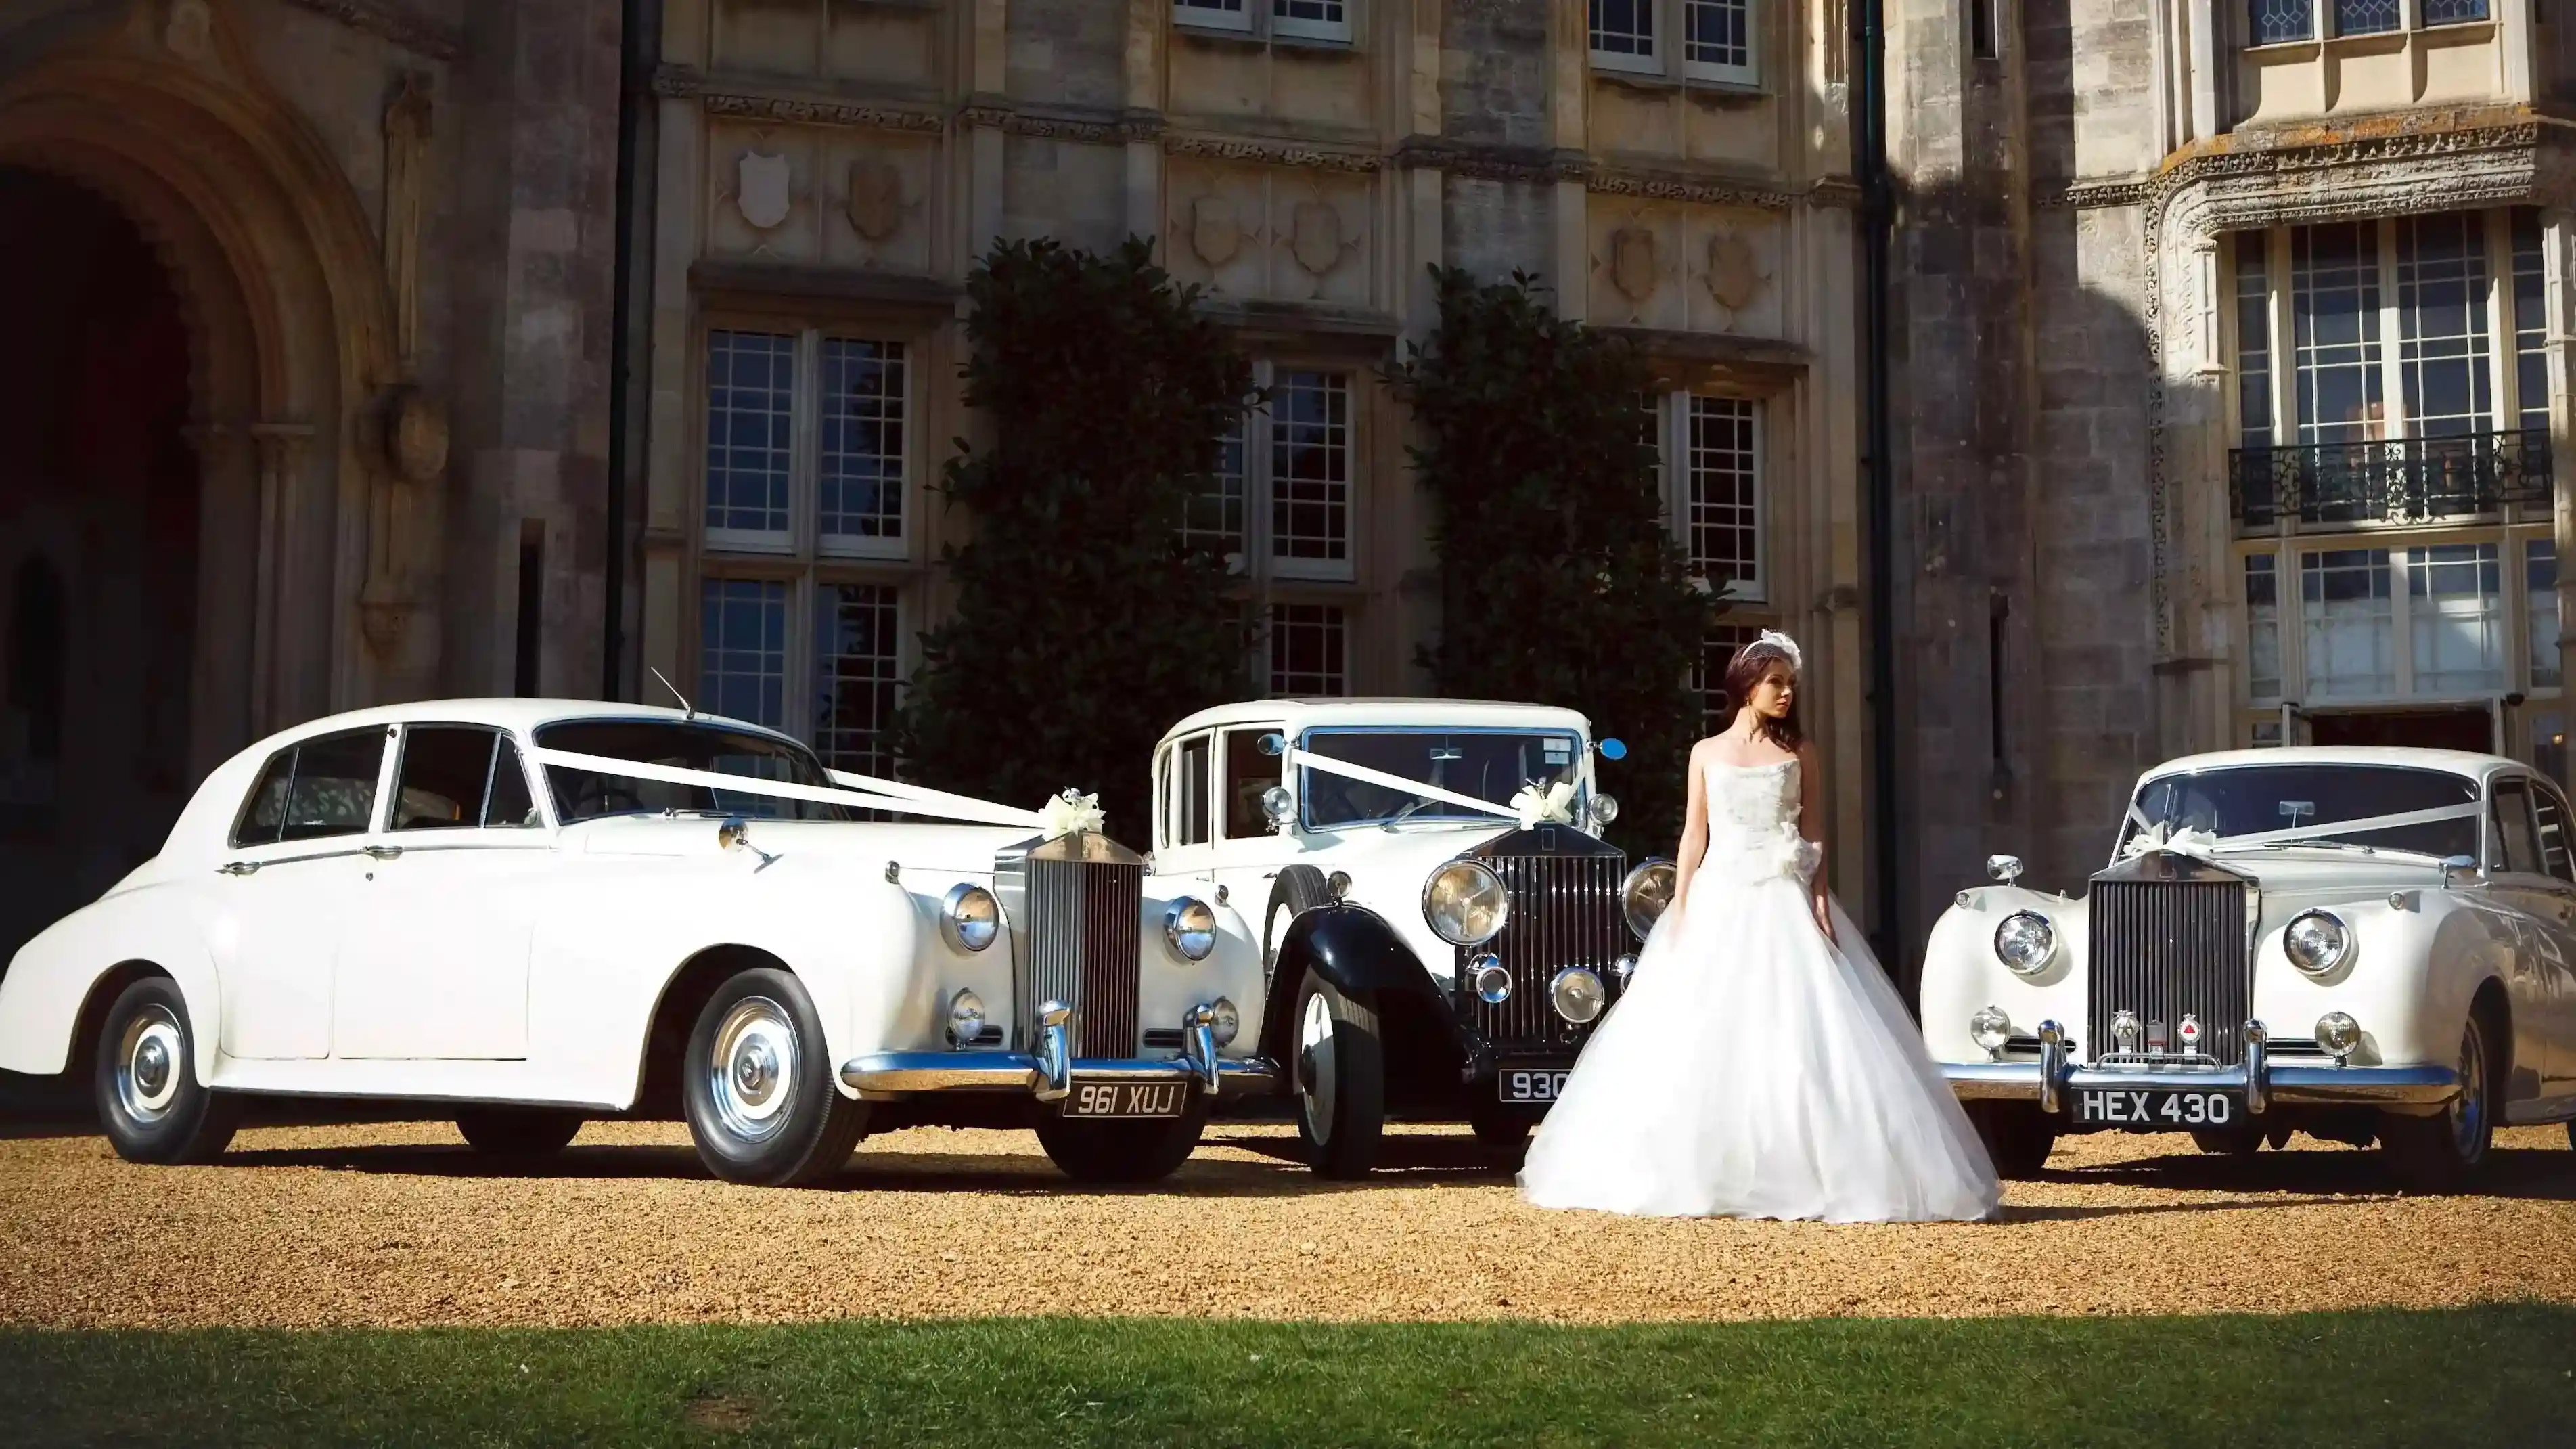 Selection of three classic and Vintage Rolls-Royce in White with Bride wearing a white wedding dress standing in the middle of the vehicles. Background is a popular Cheshire wedding venue in the style of a castle.